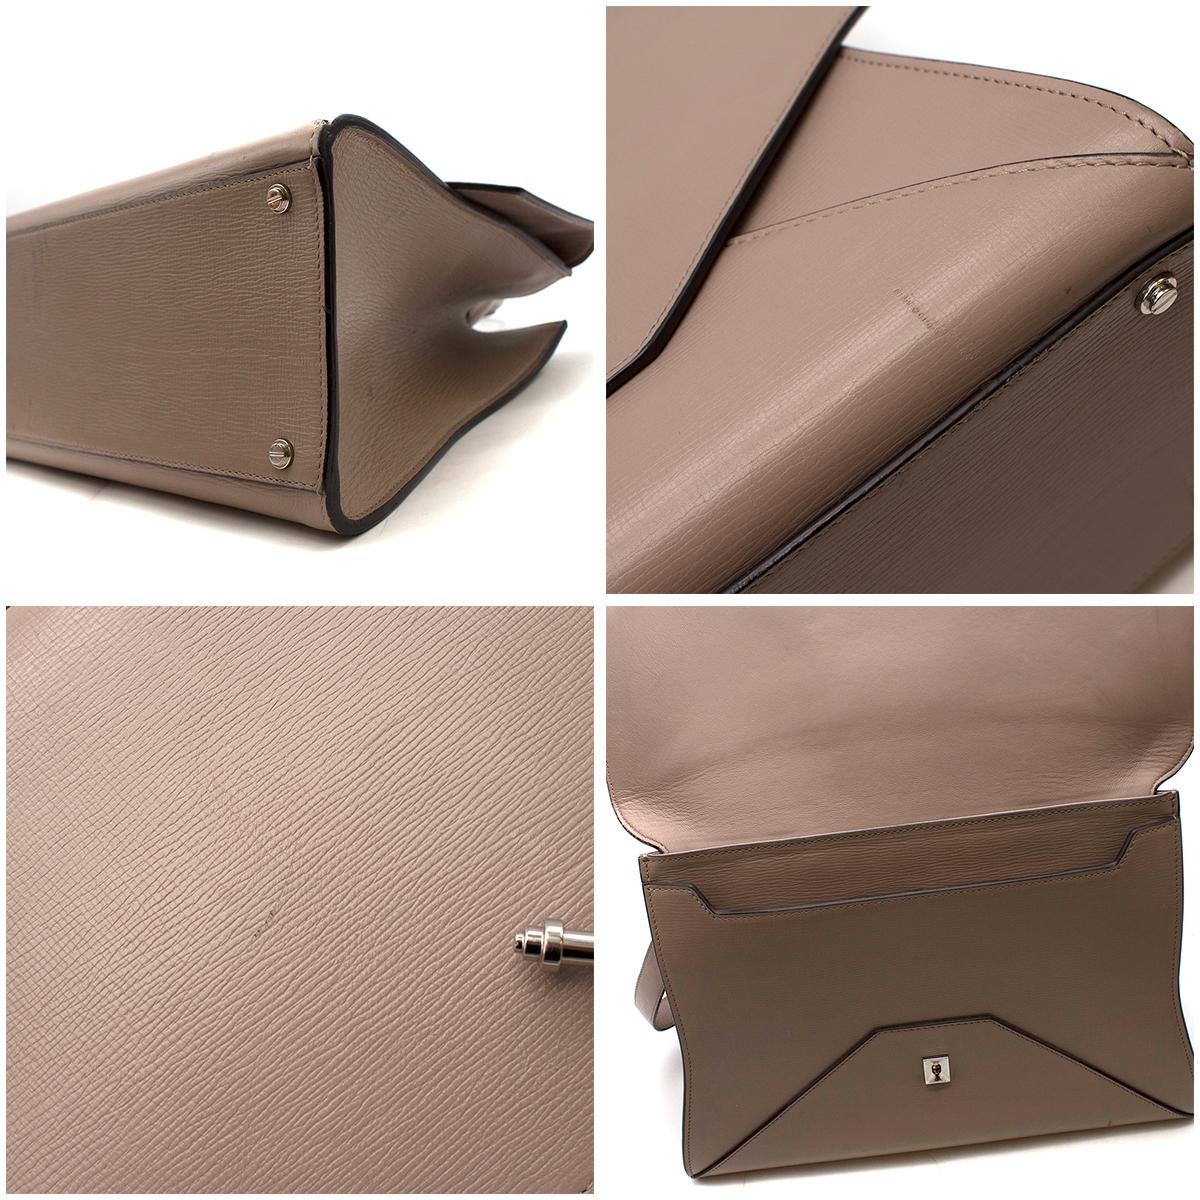 Givenchy Medium Taupe Obsedia Satchel For Sale 1